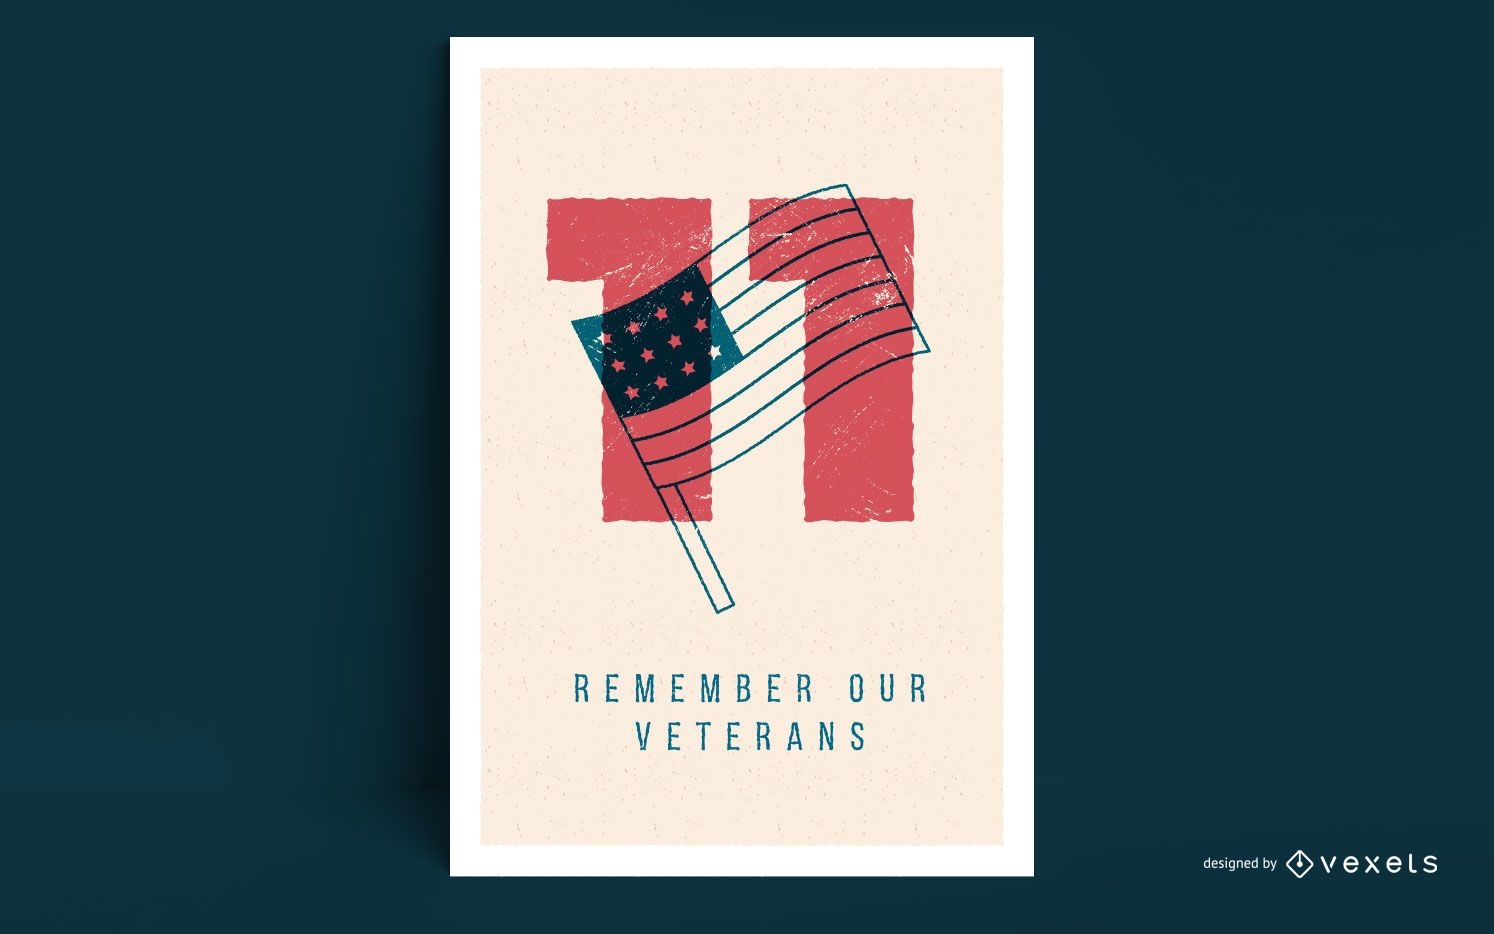 Remember our veterans day poster design